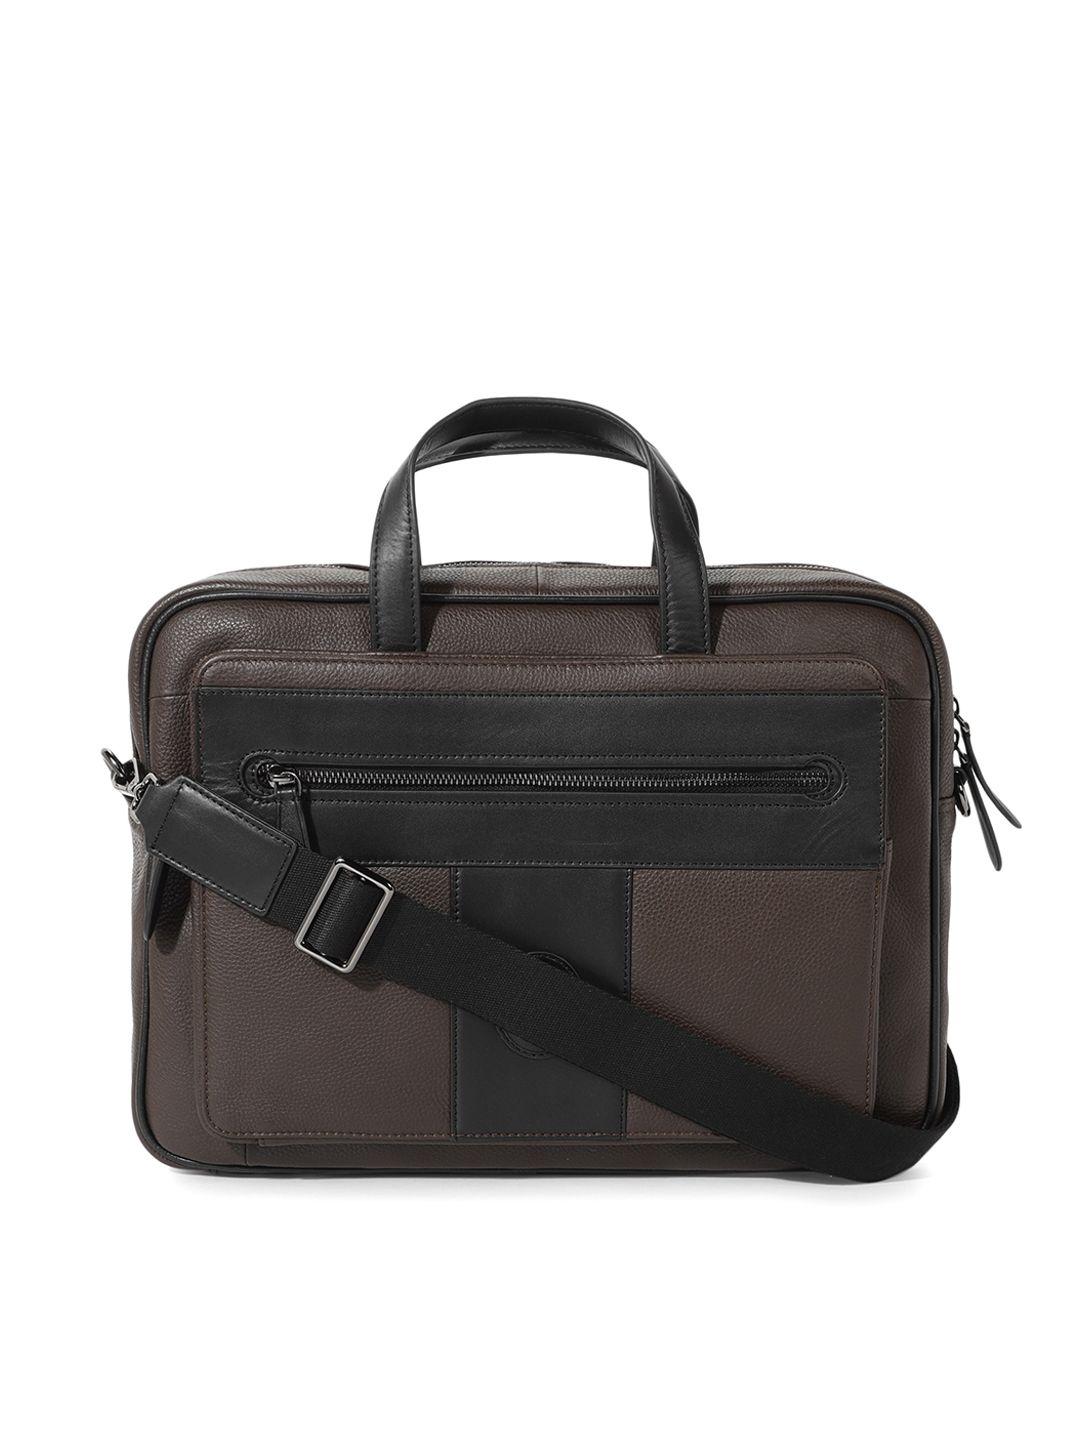 ted baker brown colourblocked leather structured handheld bag